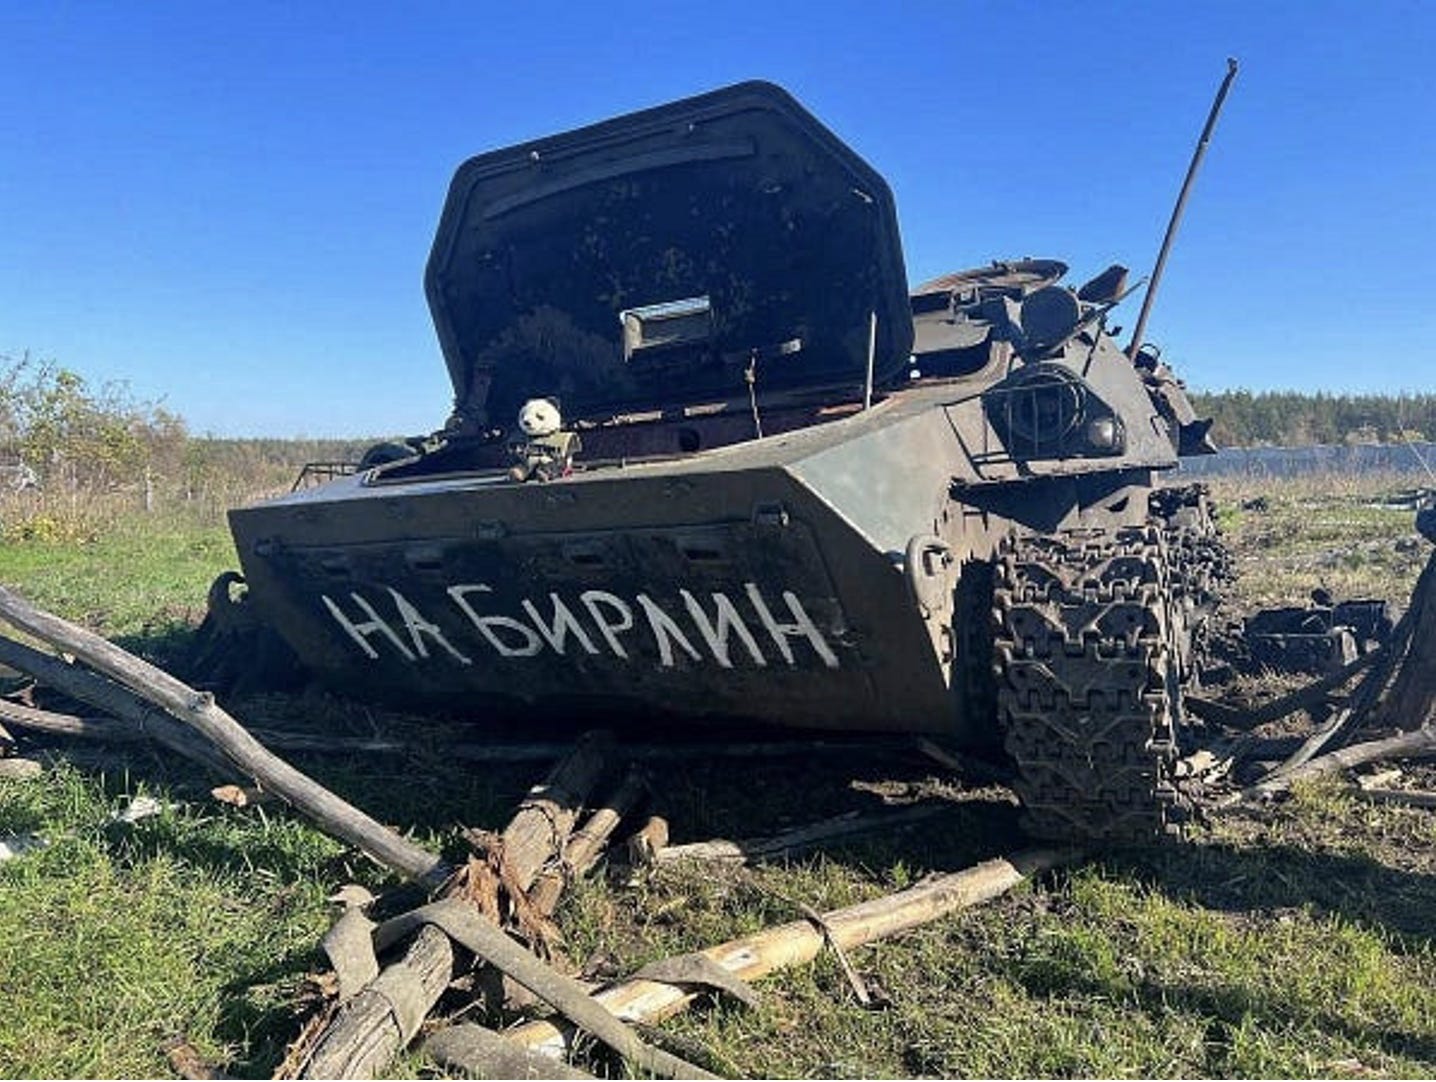 This is a Russian tank, it says “To Berlin“.